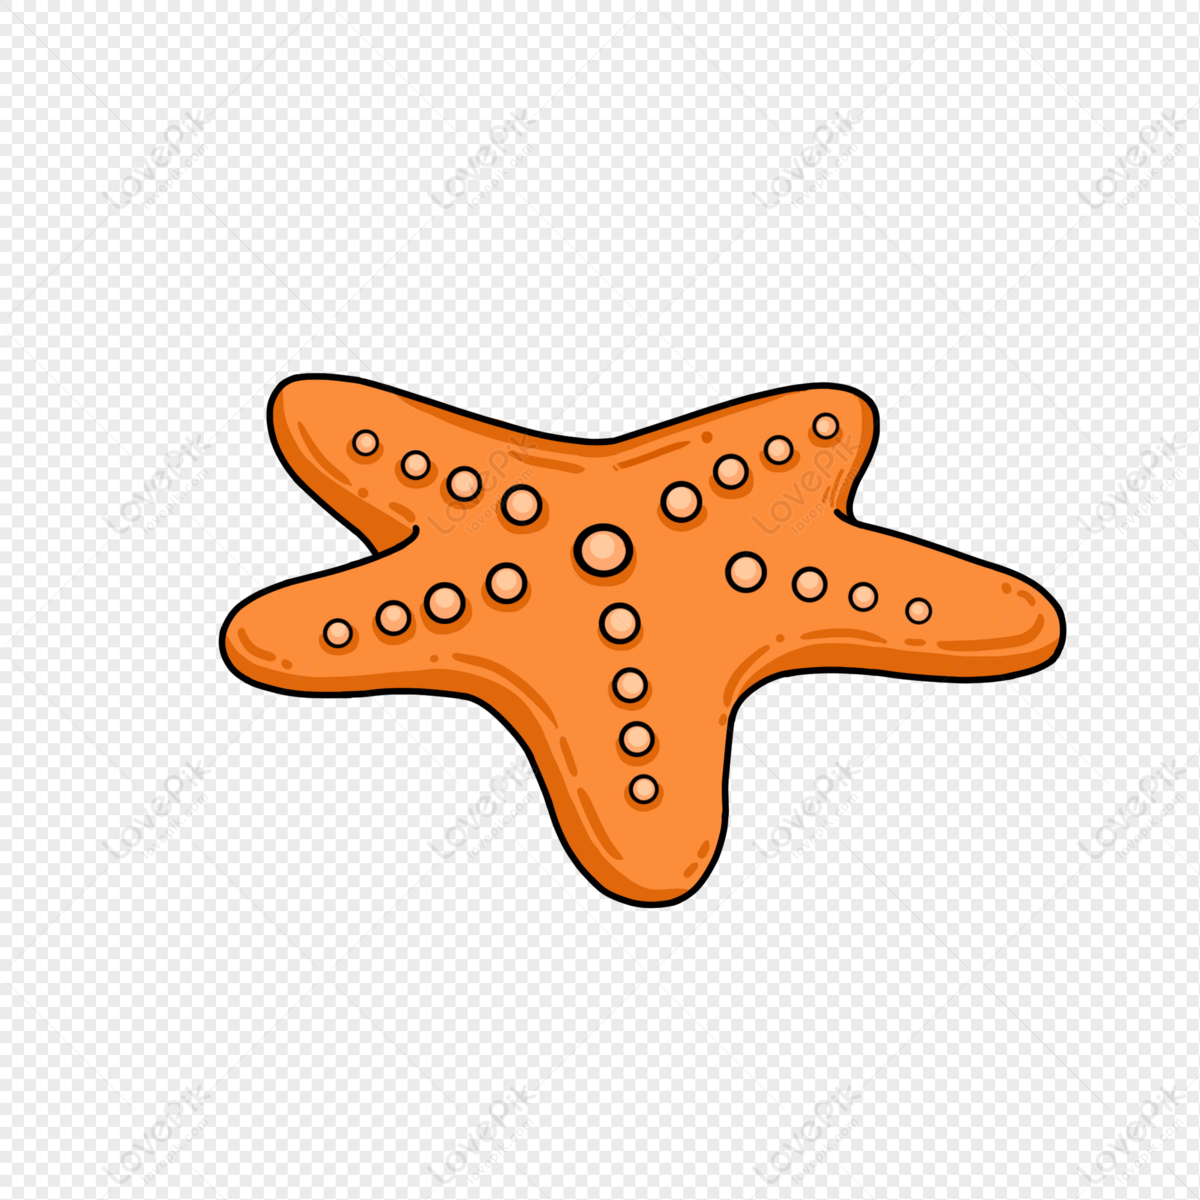 Cartoon Hand Drawn Starfish PNG Transparent Background And Clipart Image  For Free Download - Lovepik | 401389870